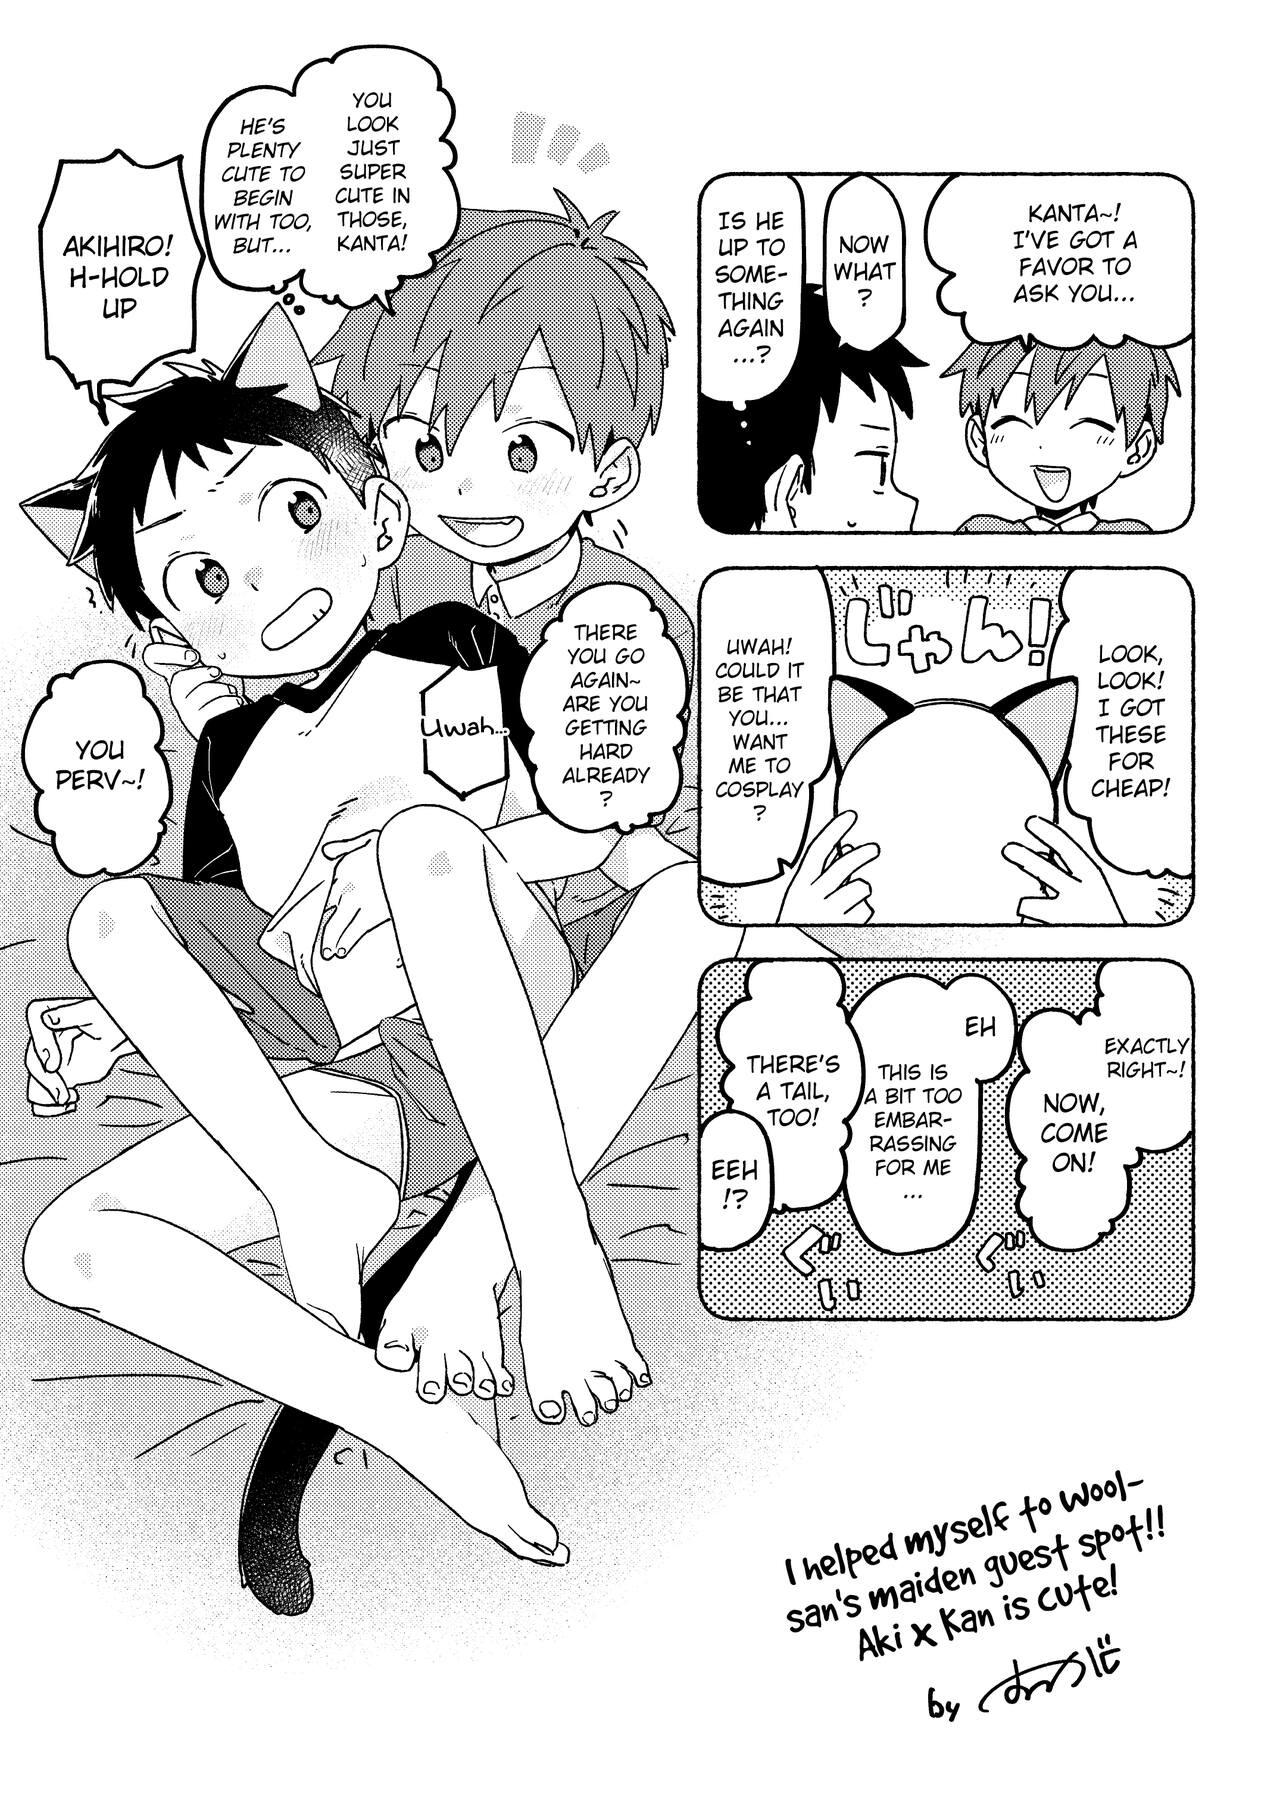 Tomodachi to Jikken Shite Miru Hon. Kouhen | A book about experimenting with your friend, part 2 46